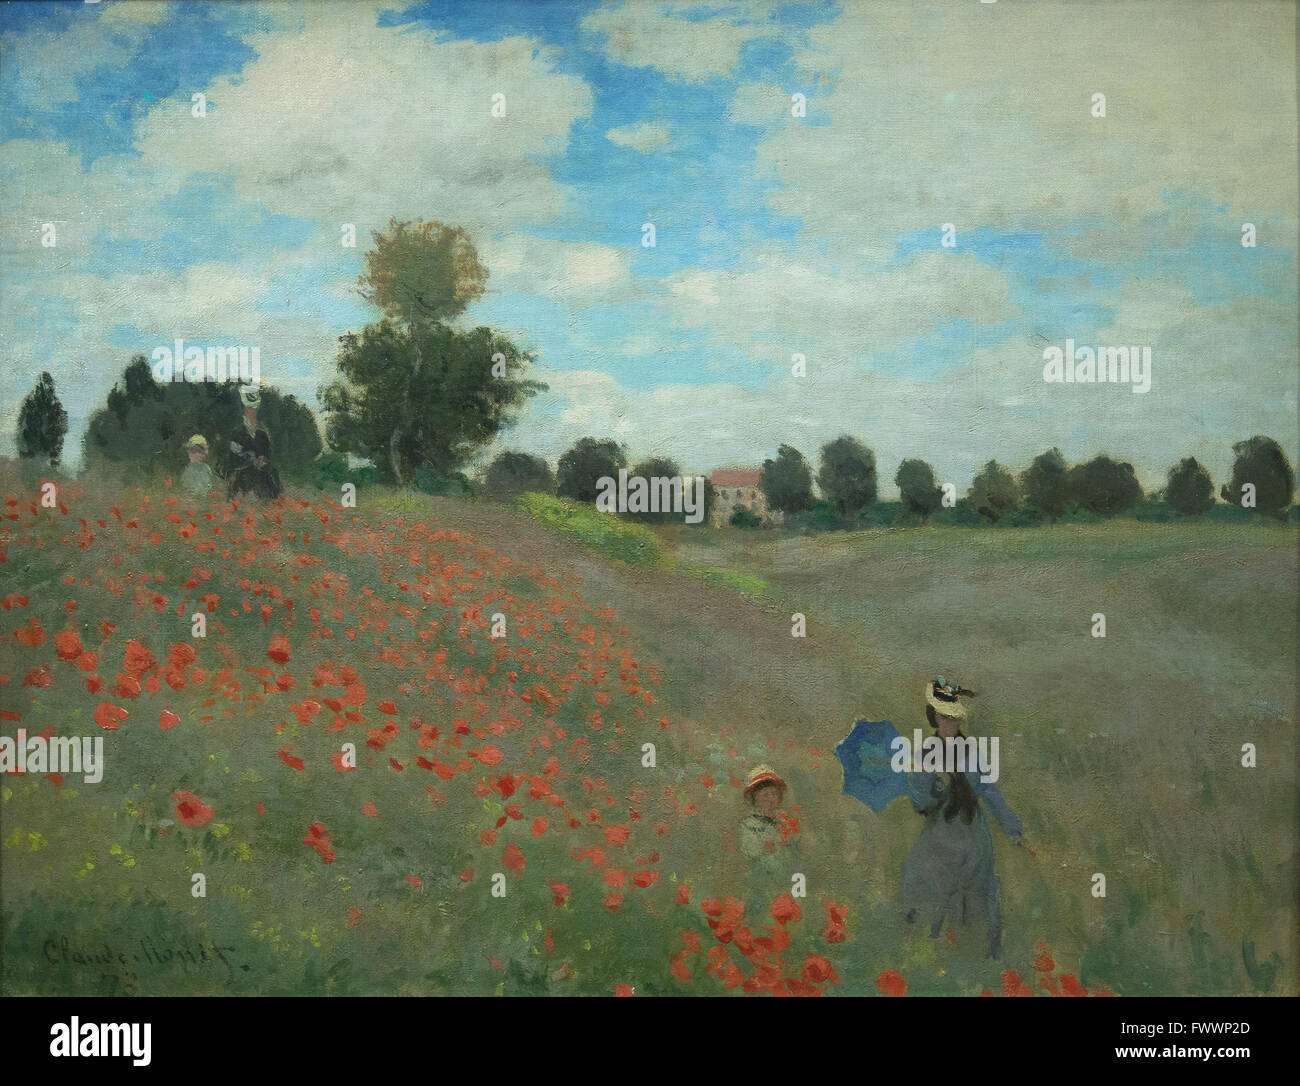 Coquelicots, Poppy Field, Argenteuil by Claude Monet 1873 Musee D'Orsay Paris France Europe Stock Photo